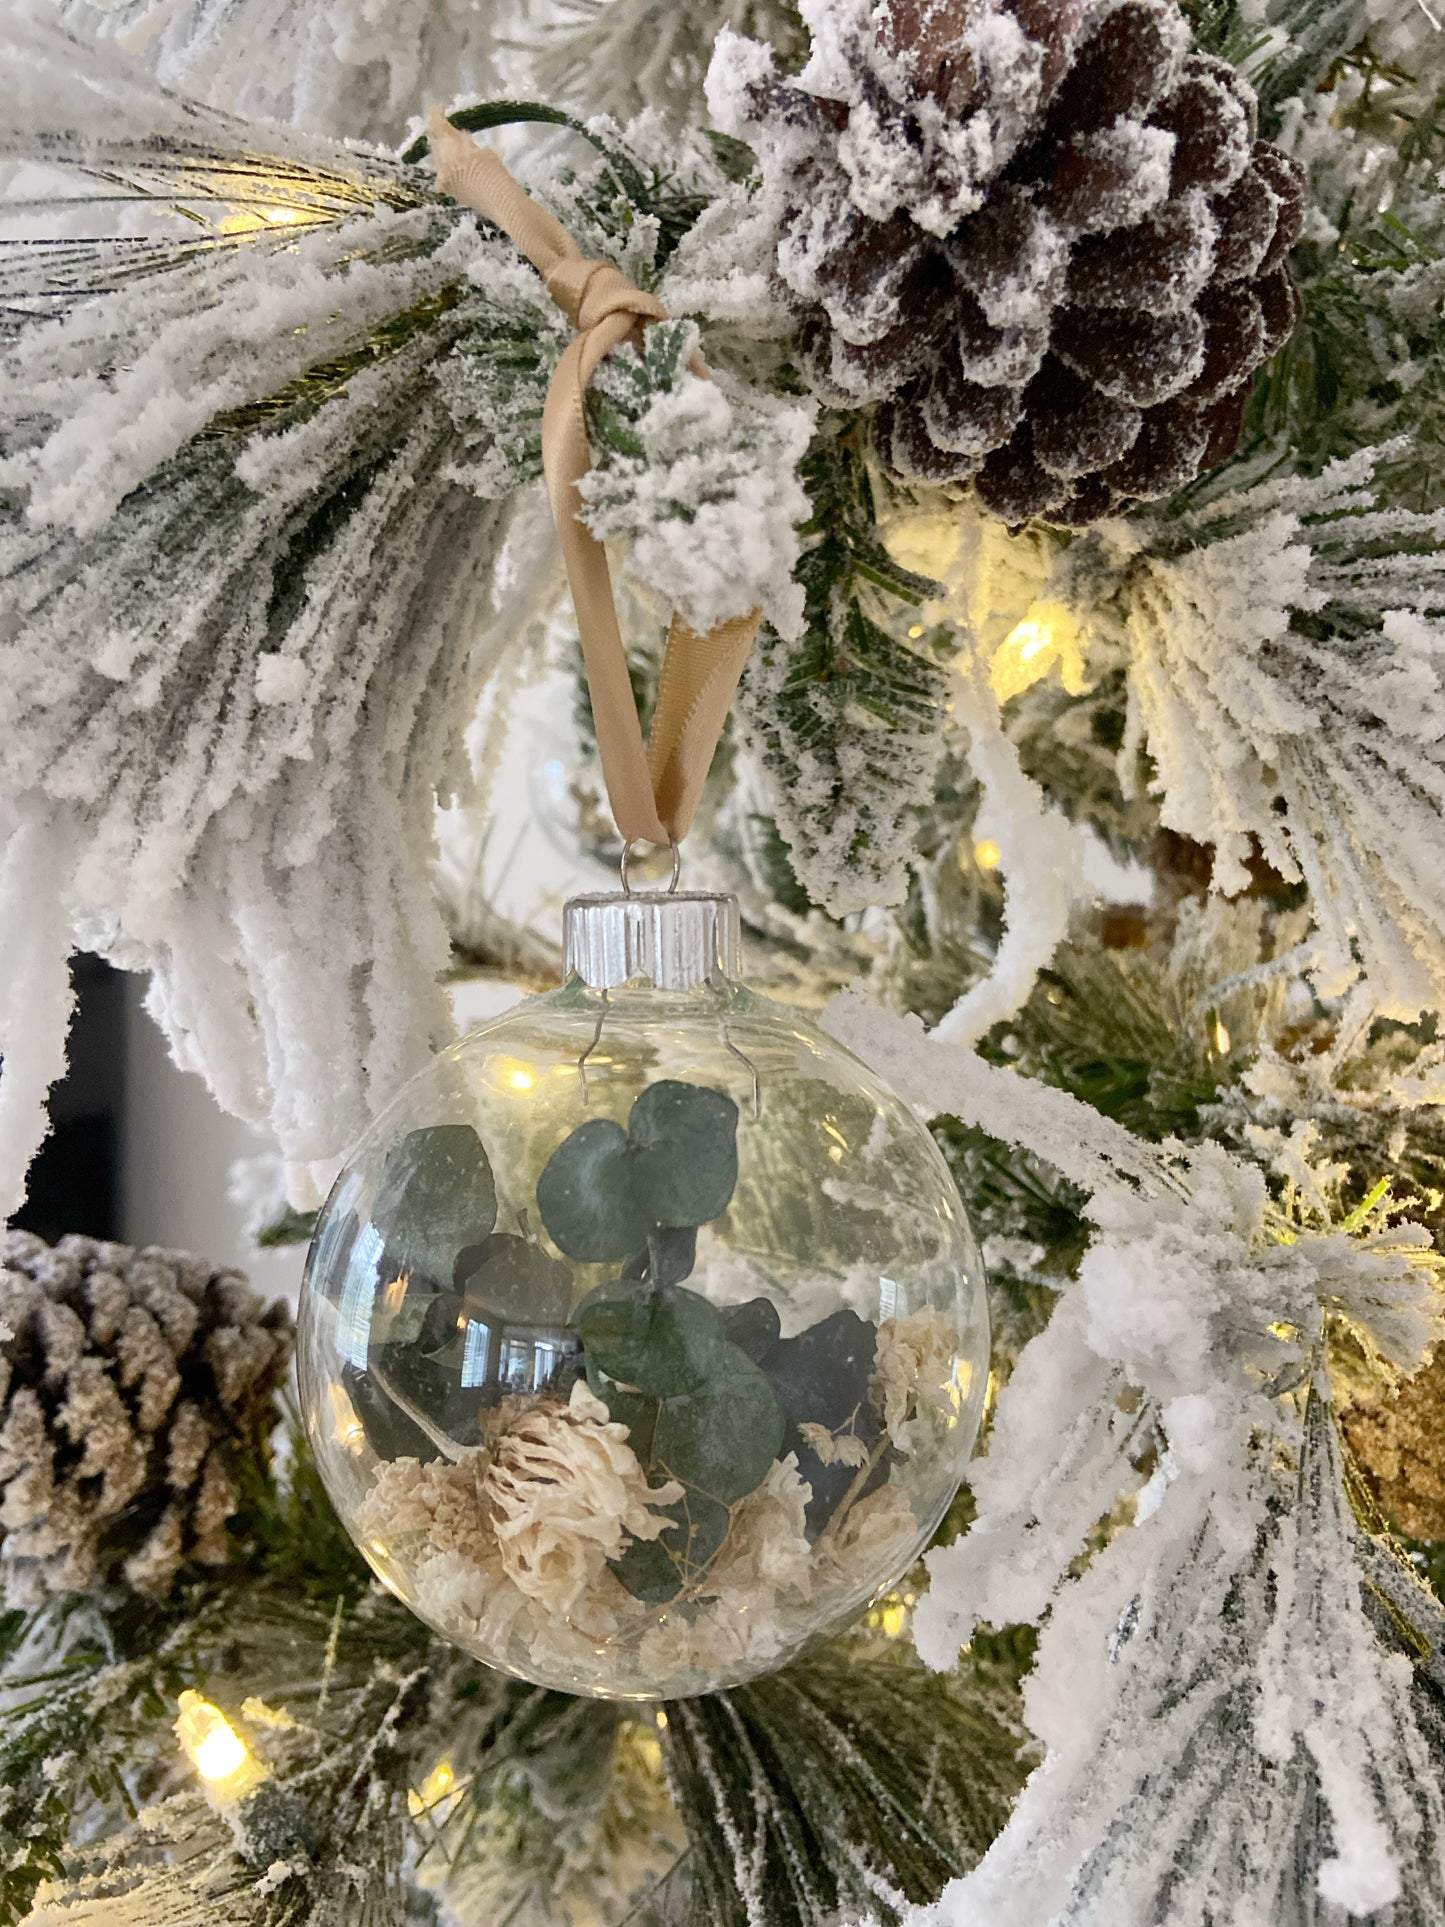 Glass Ornament with Dried Flowers